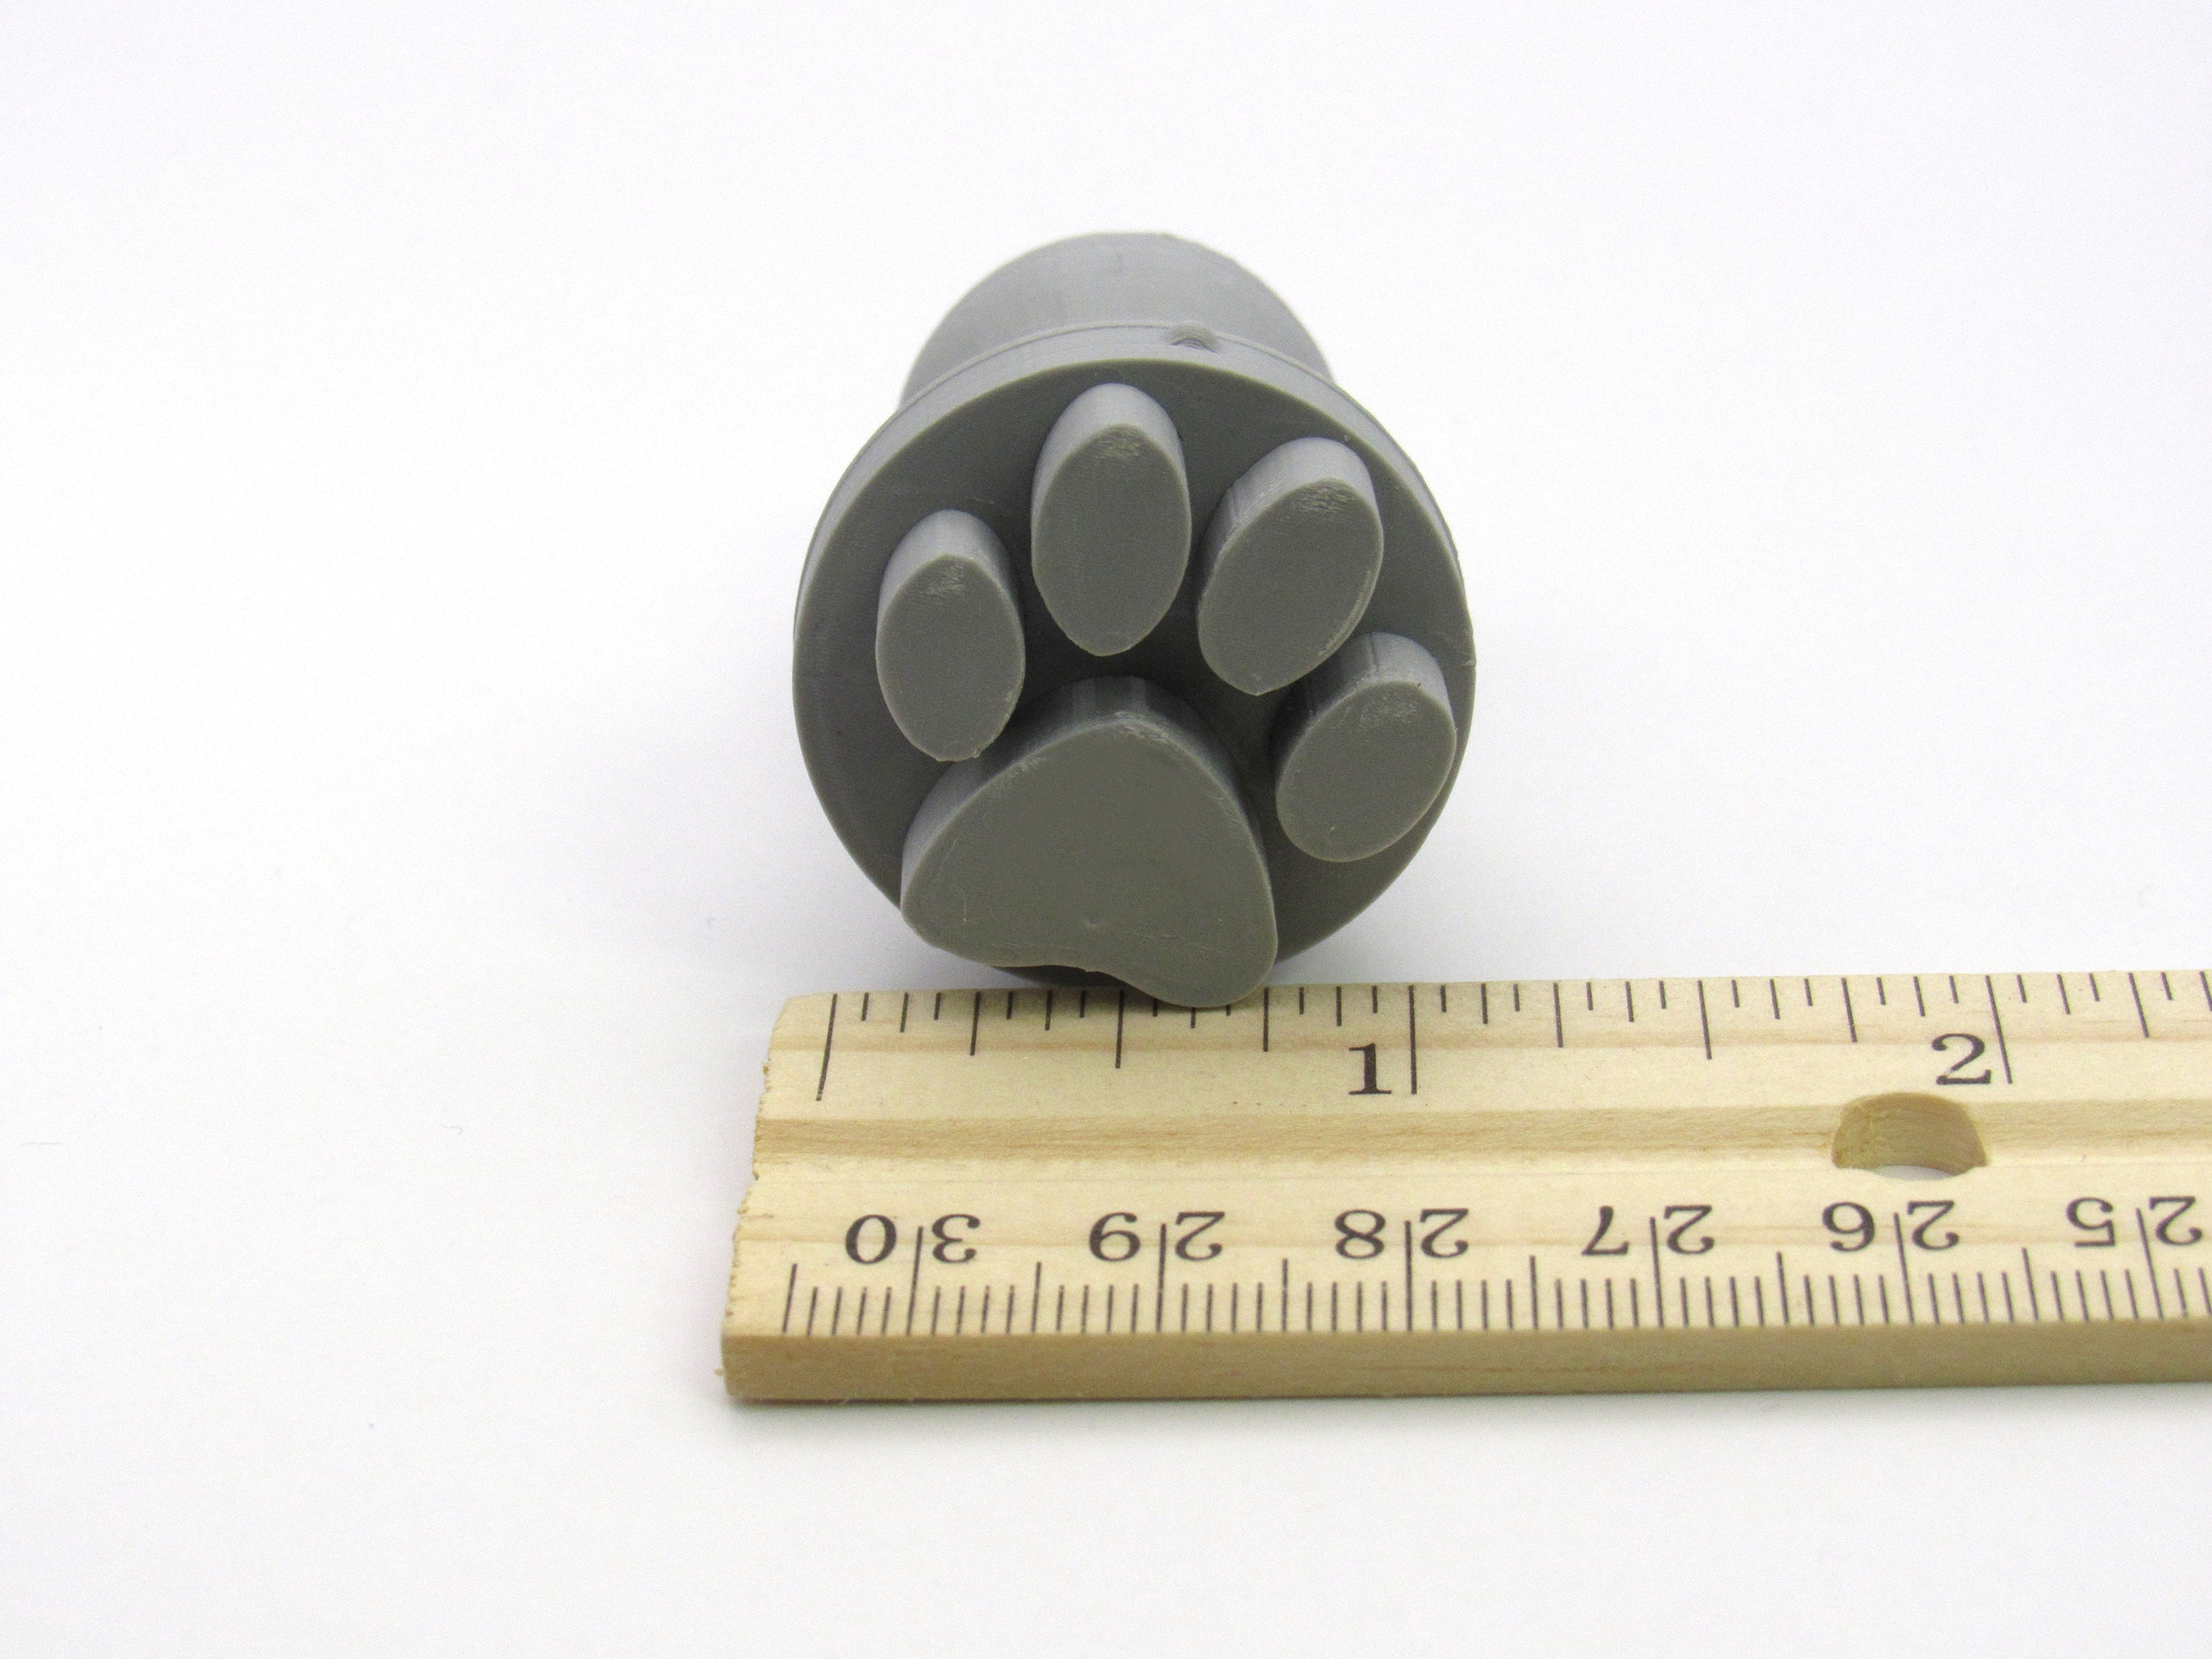 Paw Print Clay Stamp - round pendant pottery stamp with cutter Round pendant - A Mayes Pottery